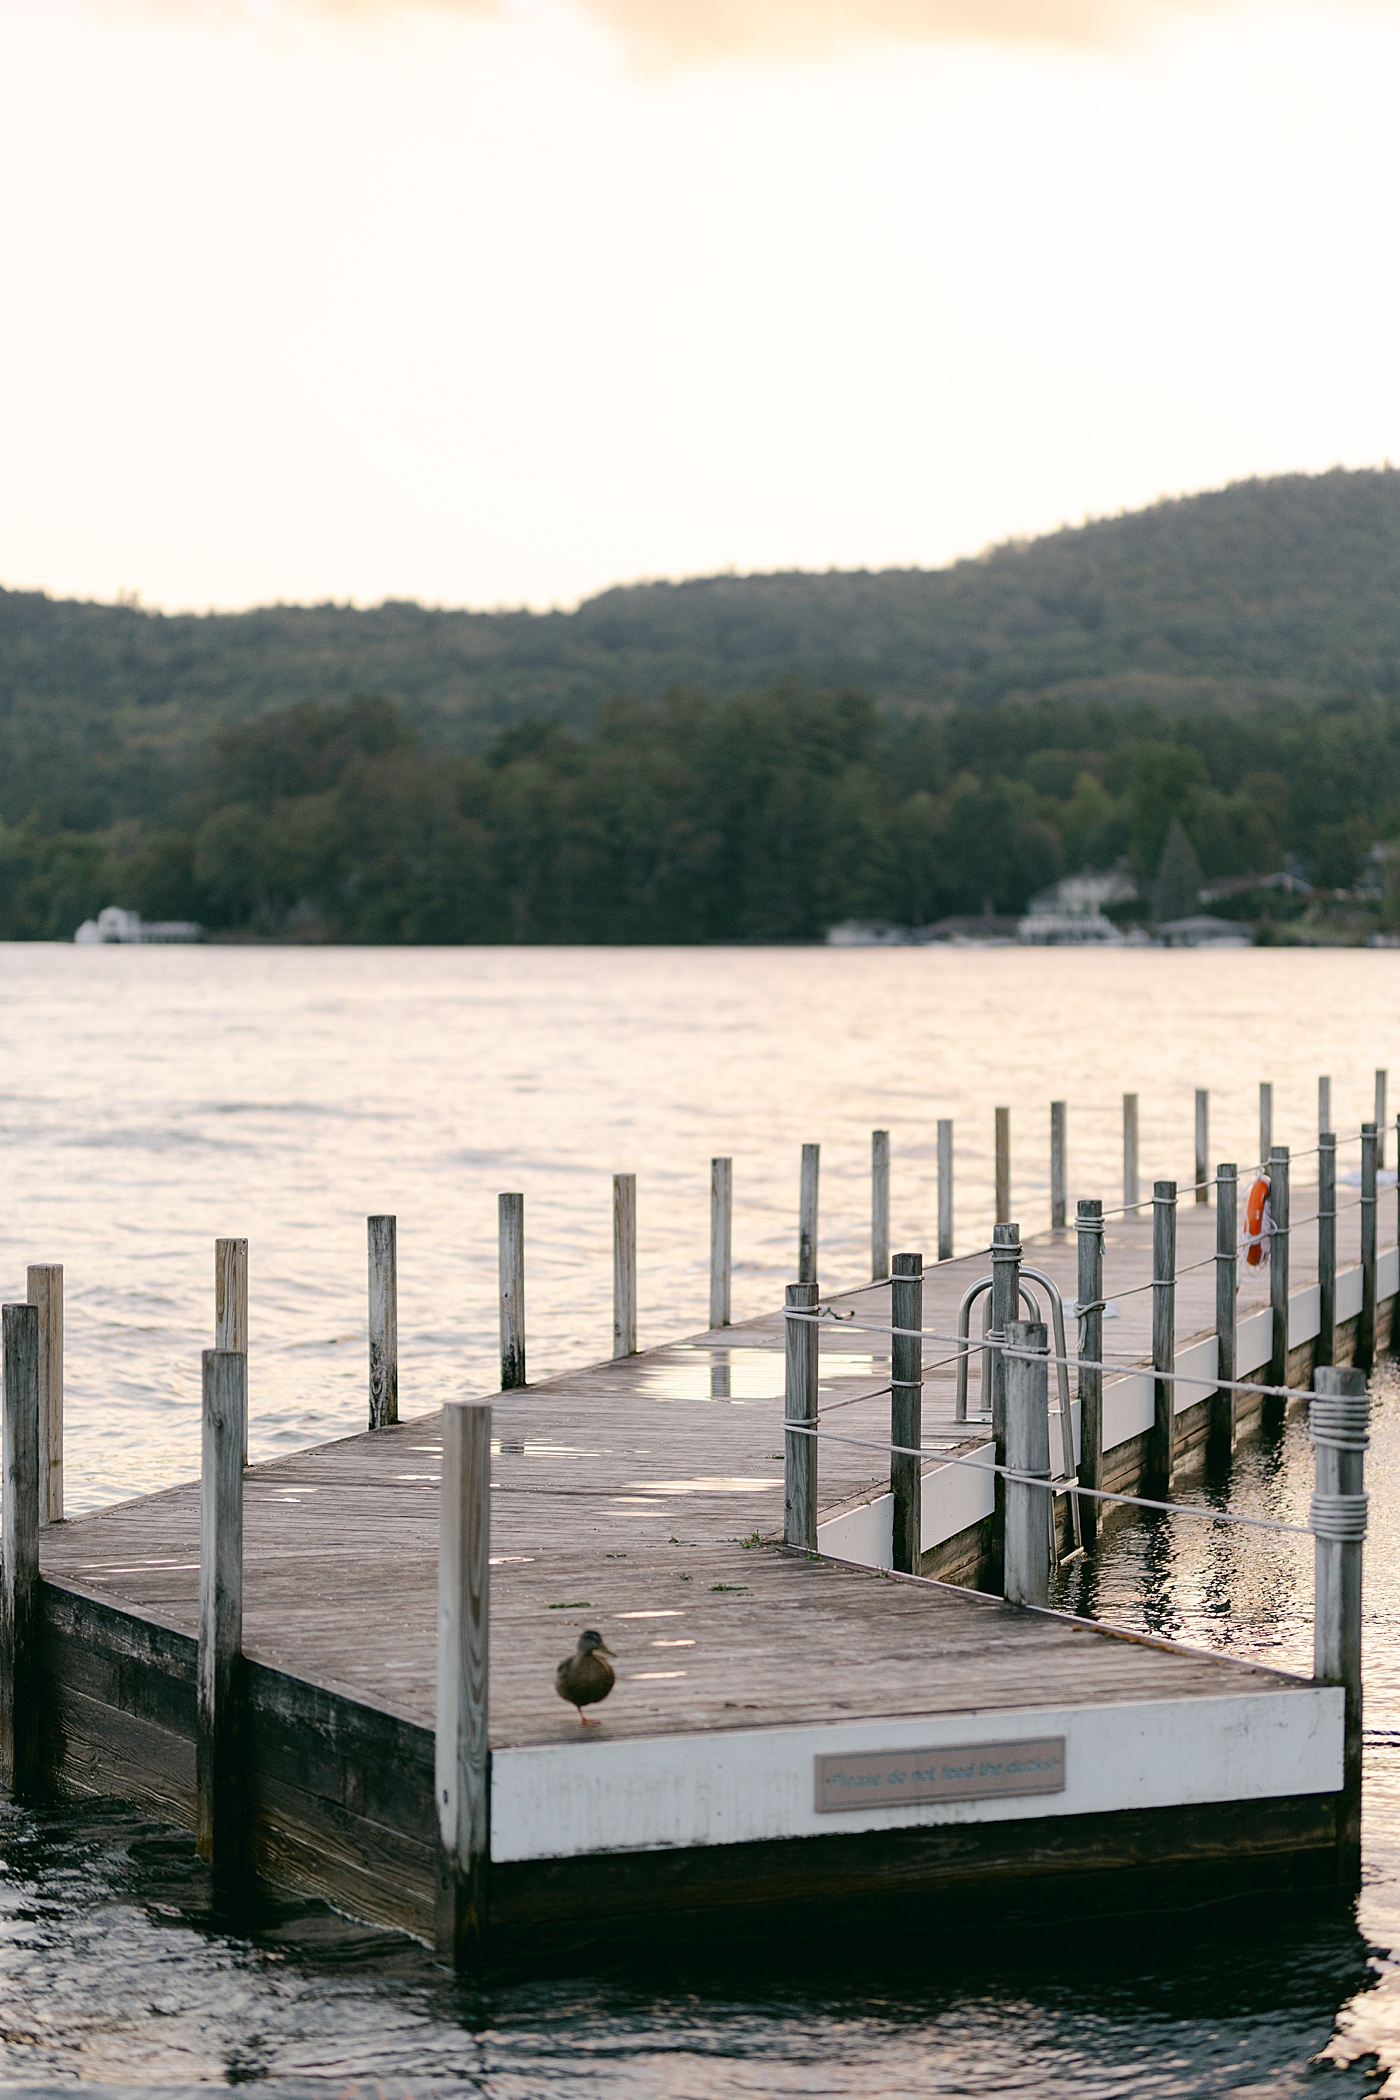 Location image of a harbor dock at sunset during Sagamore Wedding | Image by Hope Helmuth Photography